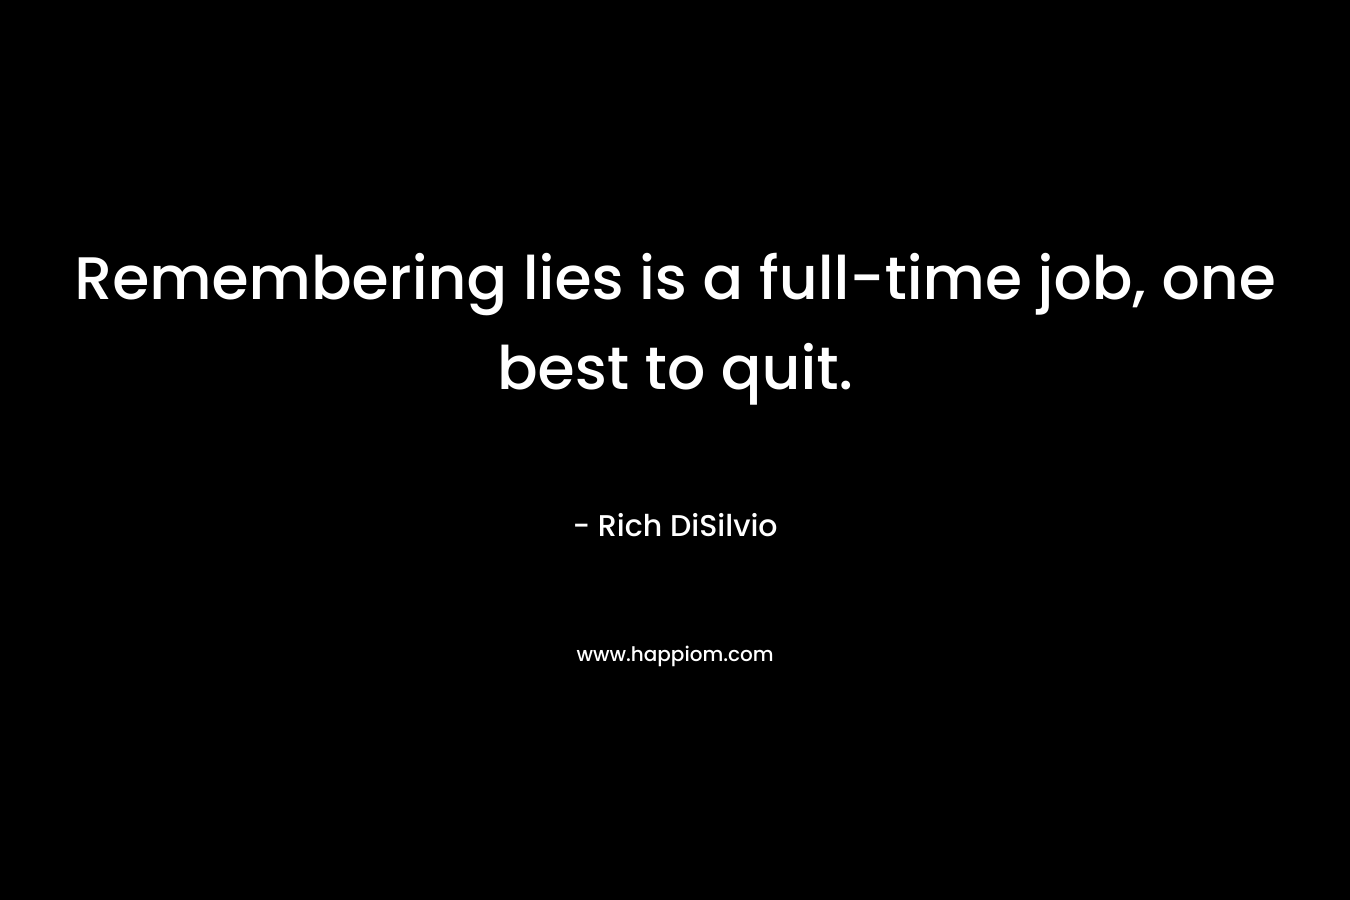 Remembering lies is a full-time job, one best to quit.